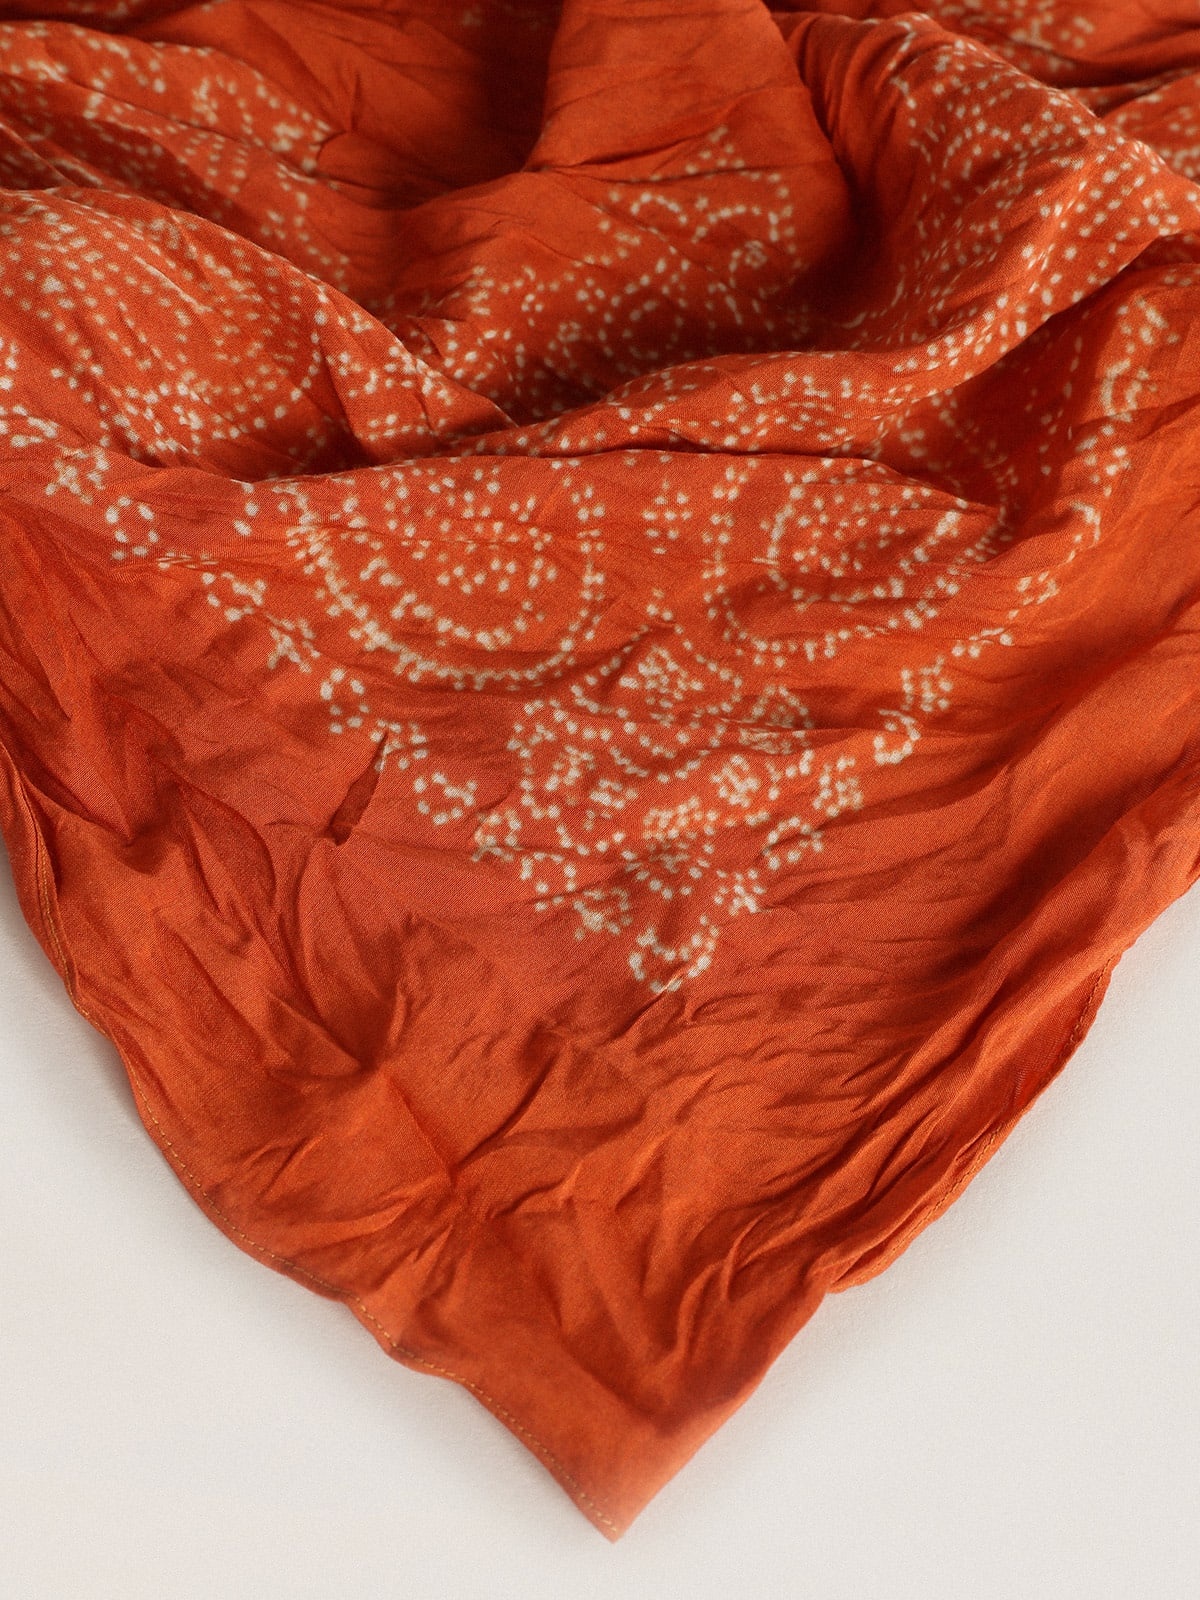 Rust-colored scarf with dotted paisley pattern - 2